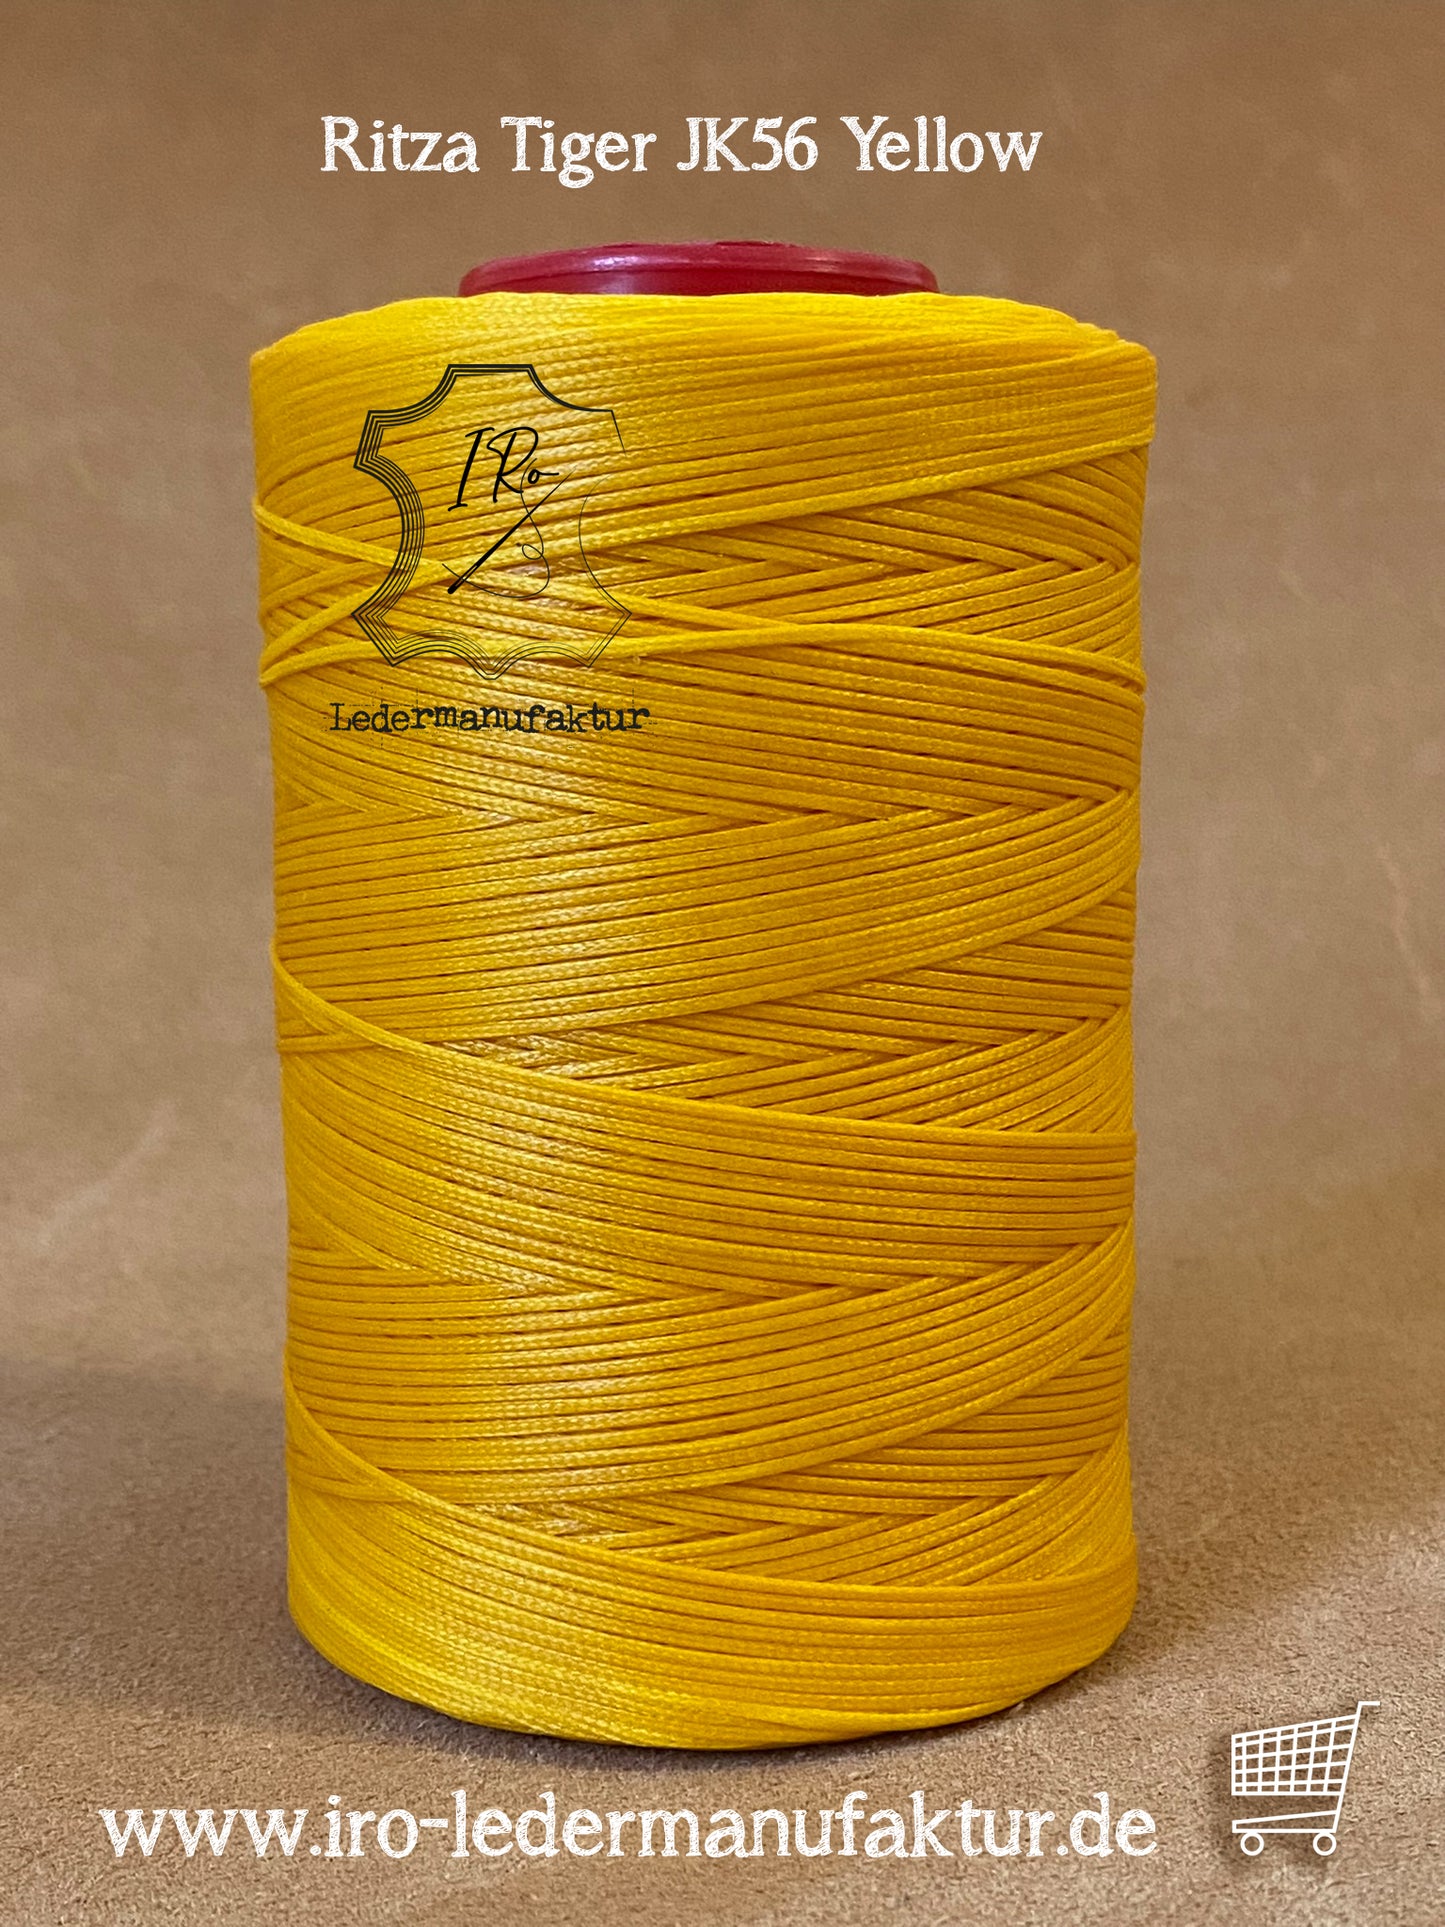 0,8 mm Ritza 25 tiger 500 m Spule | Sewing thread for leather, waxed. Hand stitch, hand sewing thread, flat shape